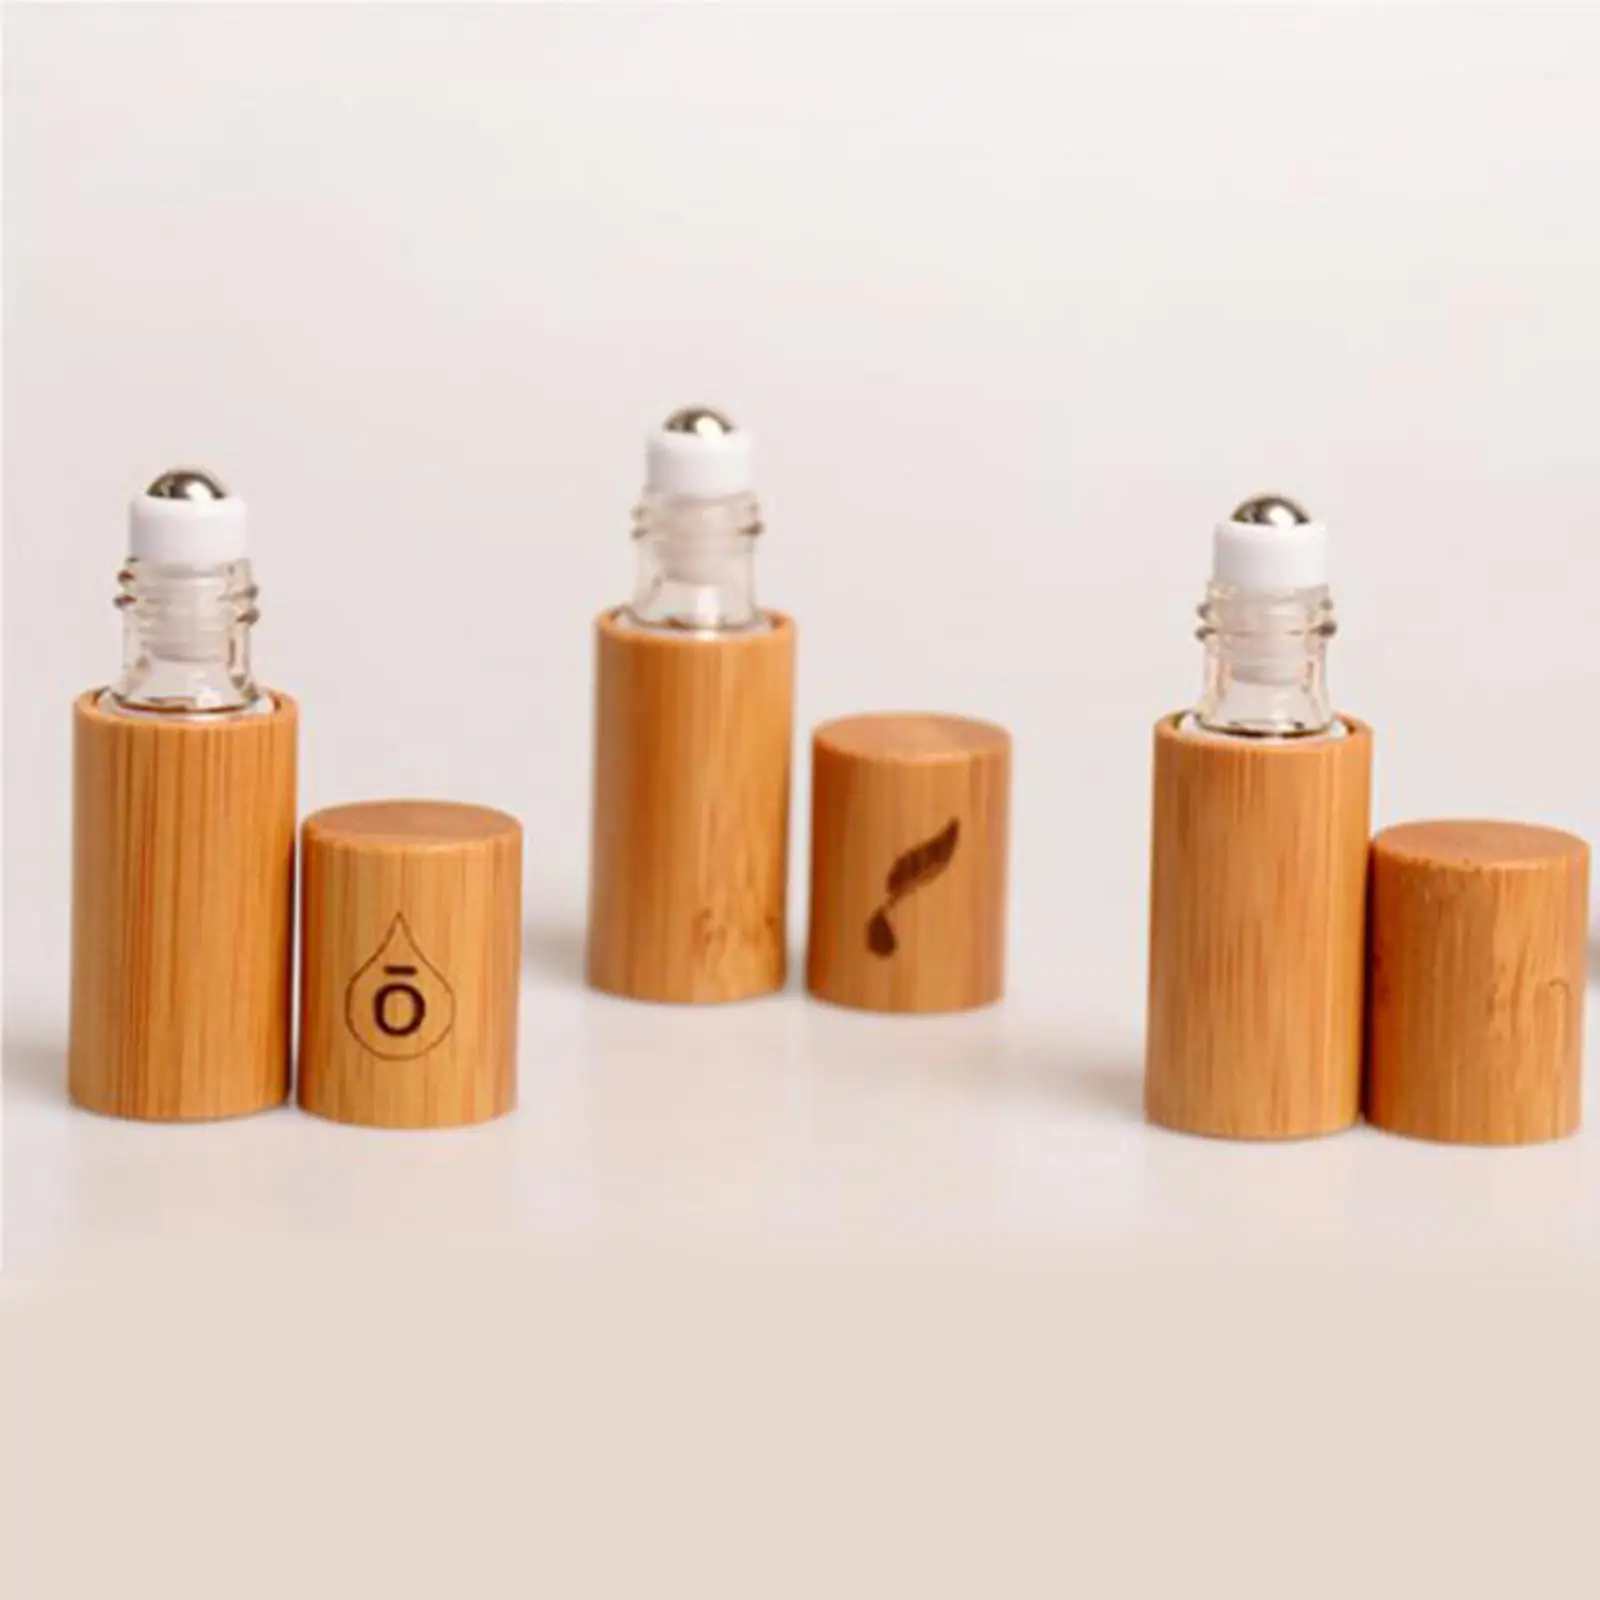 5ml Wooden Roll On Bottles Bamboo Shell Portable for Essential Oil Essence Perfume DIY No Leak Premium Aromatherapy Containers